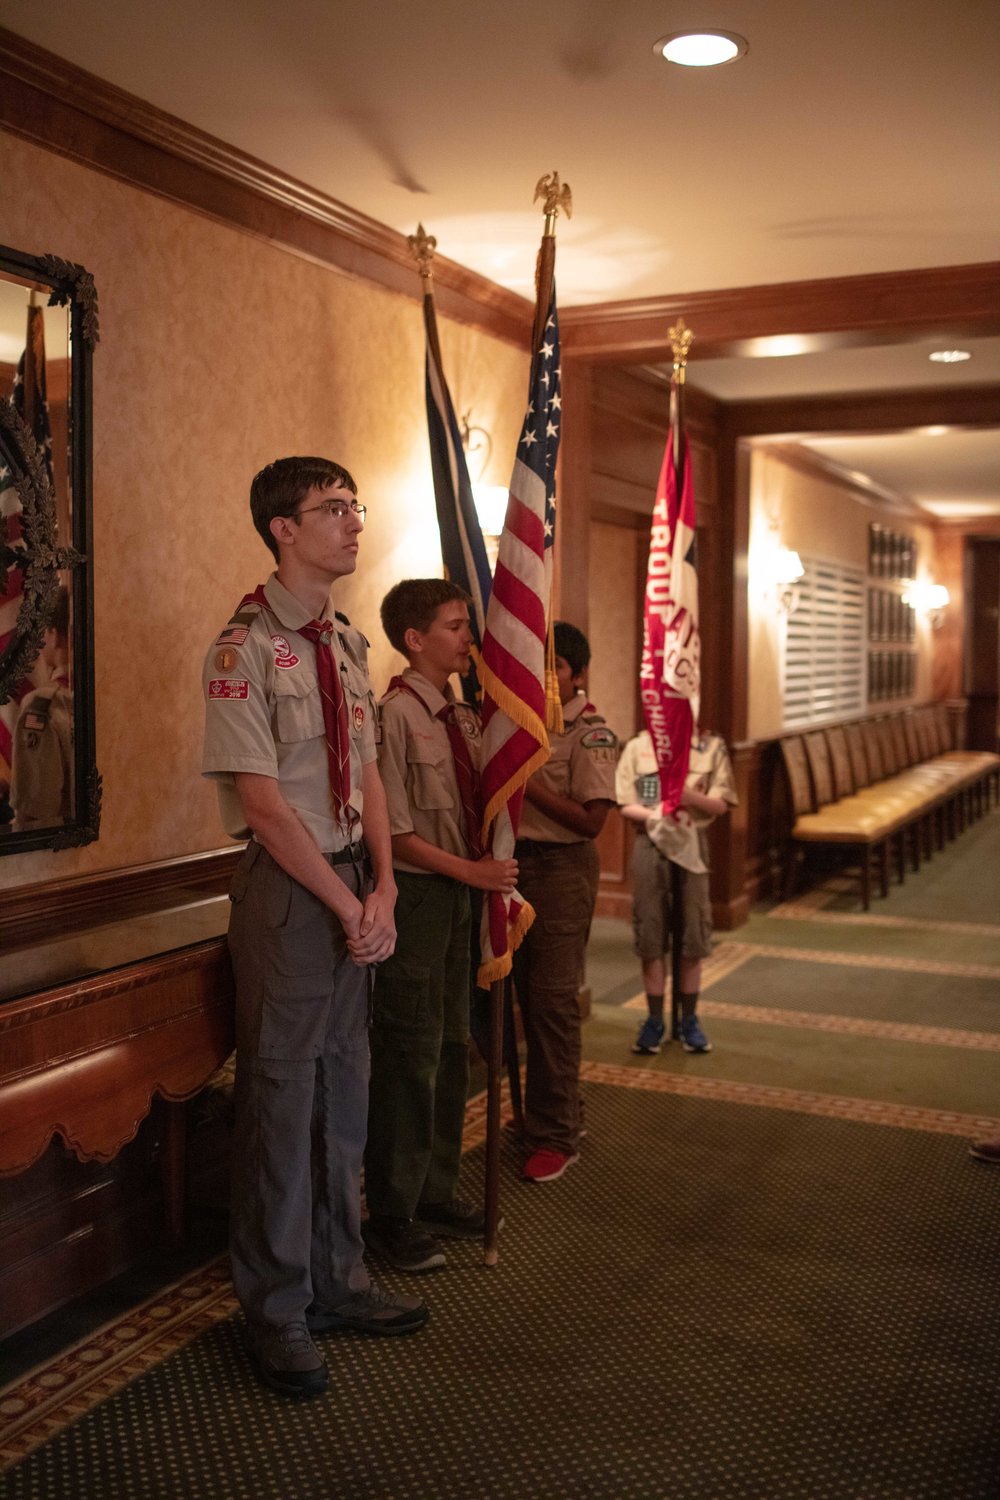 The Cumberland County Boy Scouts of America Occoneechee Council’s annual Distinguished Citizen Award Dinner was held on Aug. 18, 2022, at Highland Country Club.